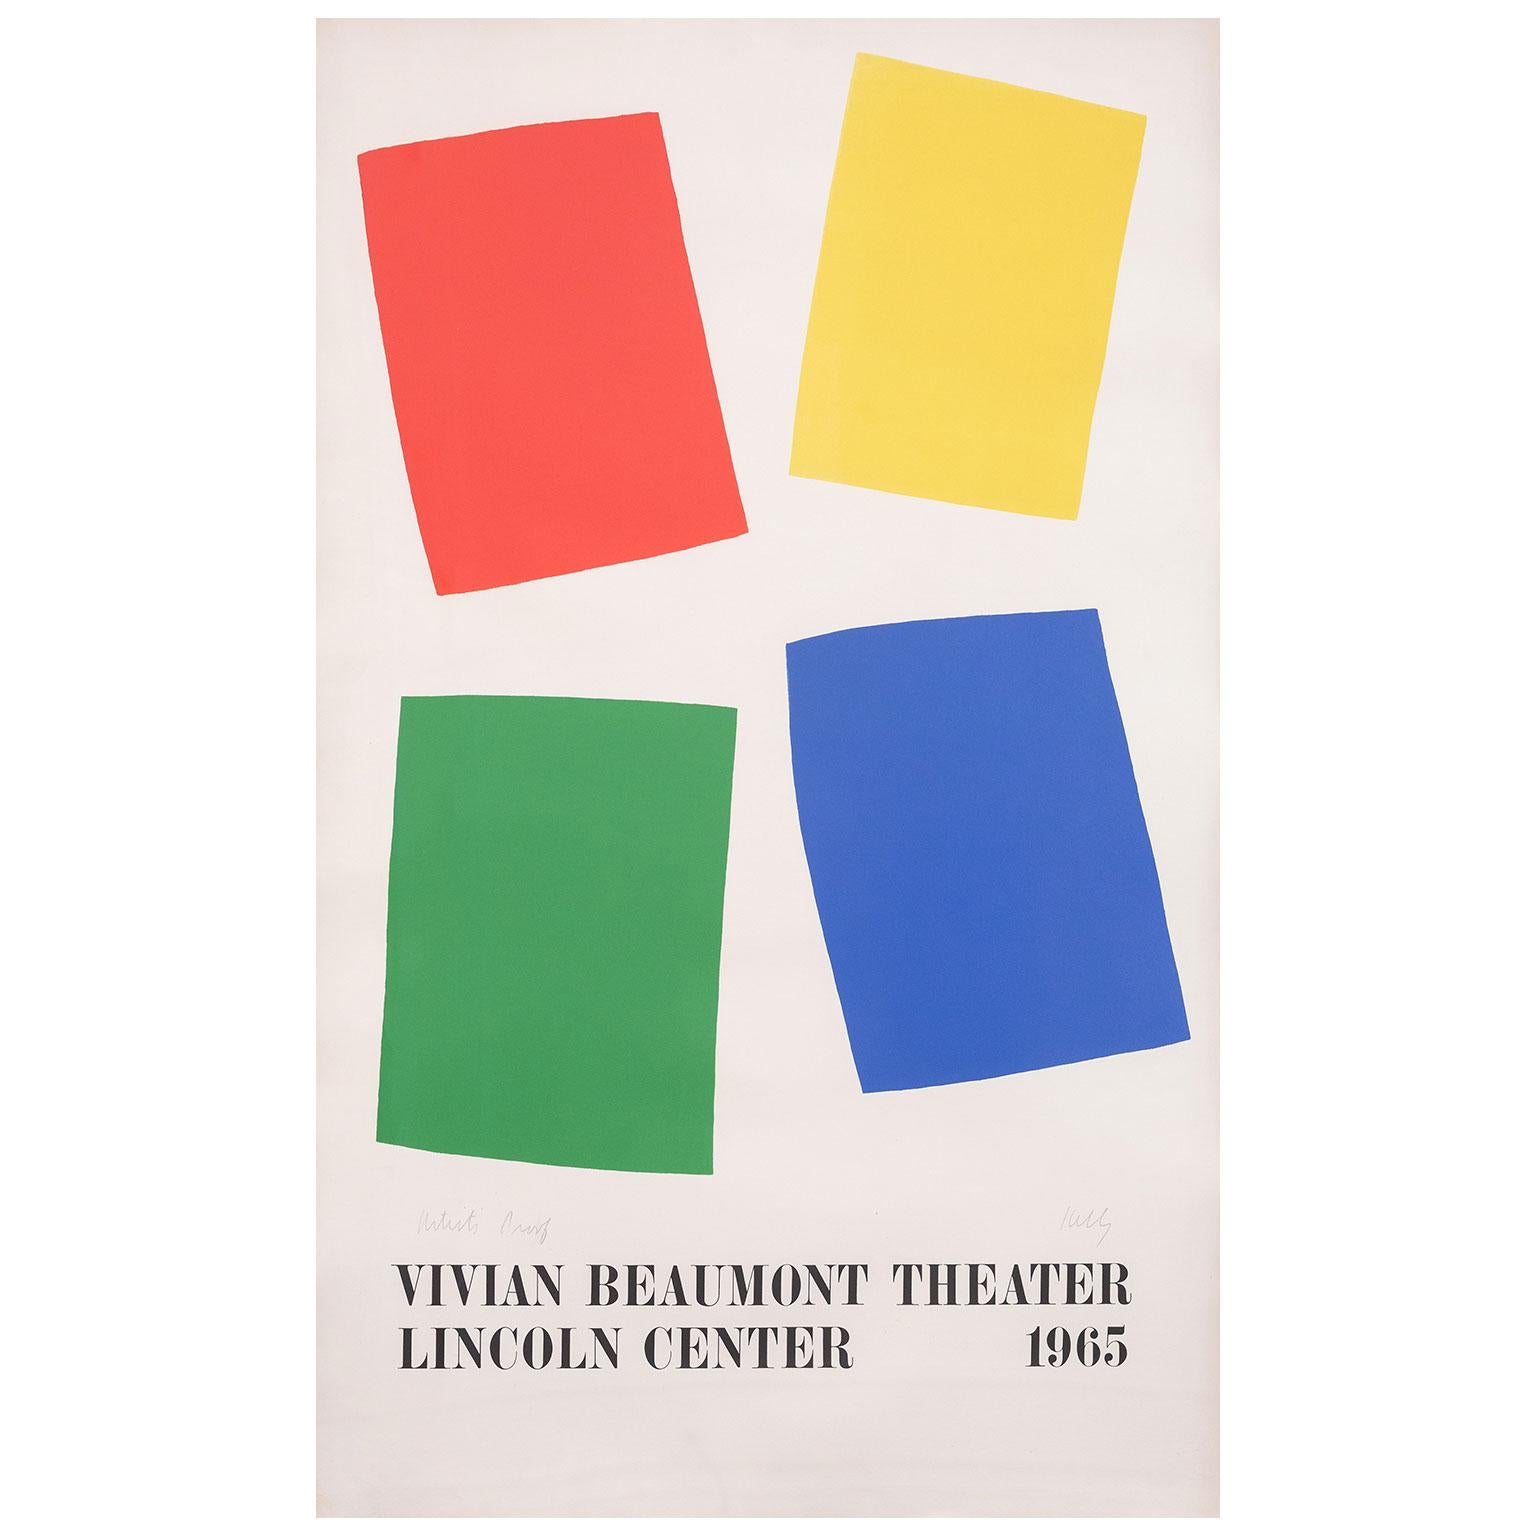 Ellsworth Kelly (b. 1923) is one of the masters of American minimalism.

He is collected internationally and renowned for his signature hypnotic shapes realized in single colors. 

Like many artists who had served in the US military during WWII,